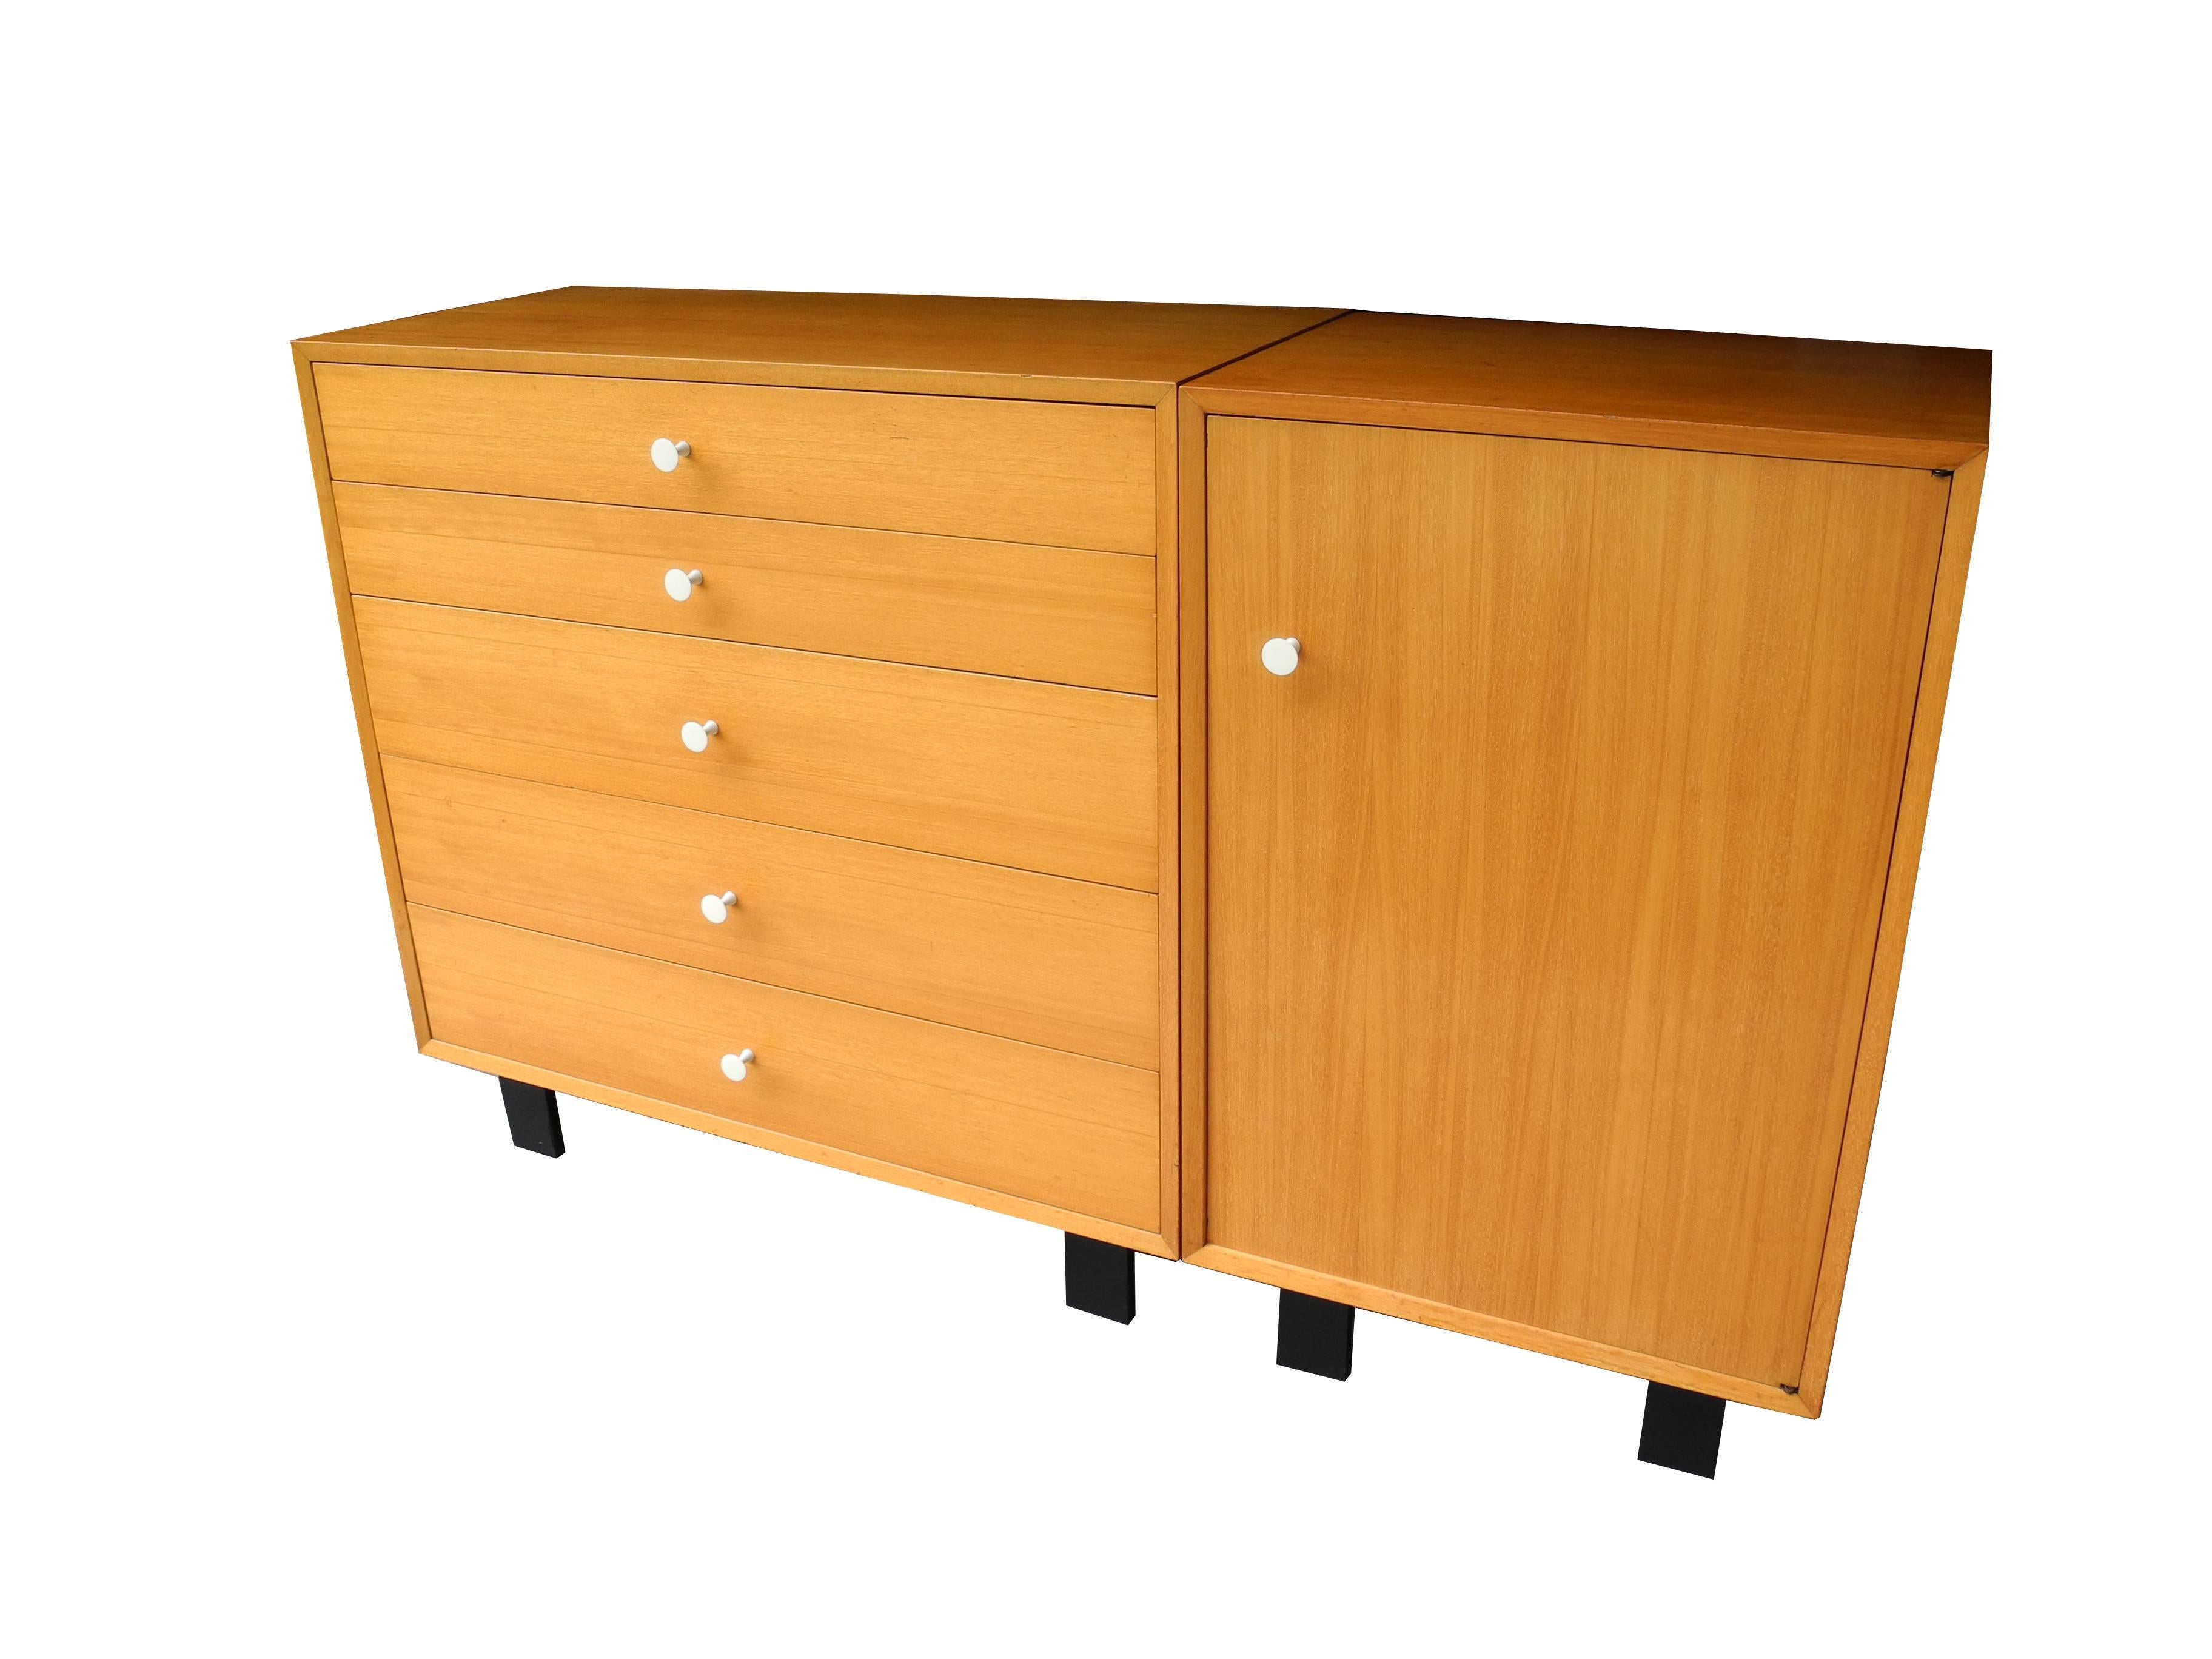 This five-drawer dresser stands next to a single cabinet with a shelf and hanging retractable rod for plenty of storage. Made for the bedroom in an exquisite primavera wood also known as white mahogany. The knobs are painted spun aluminum. The